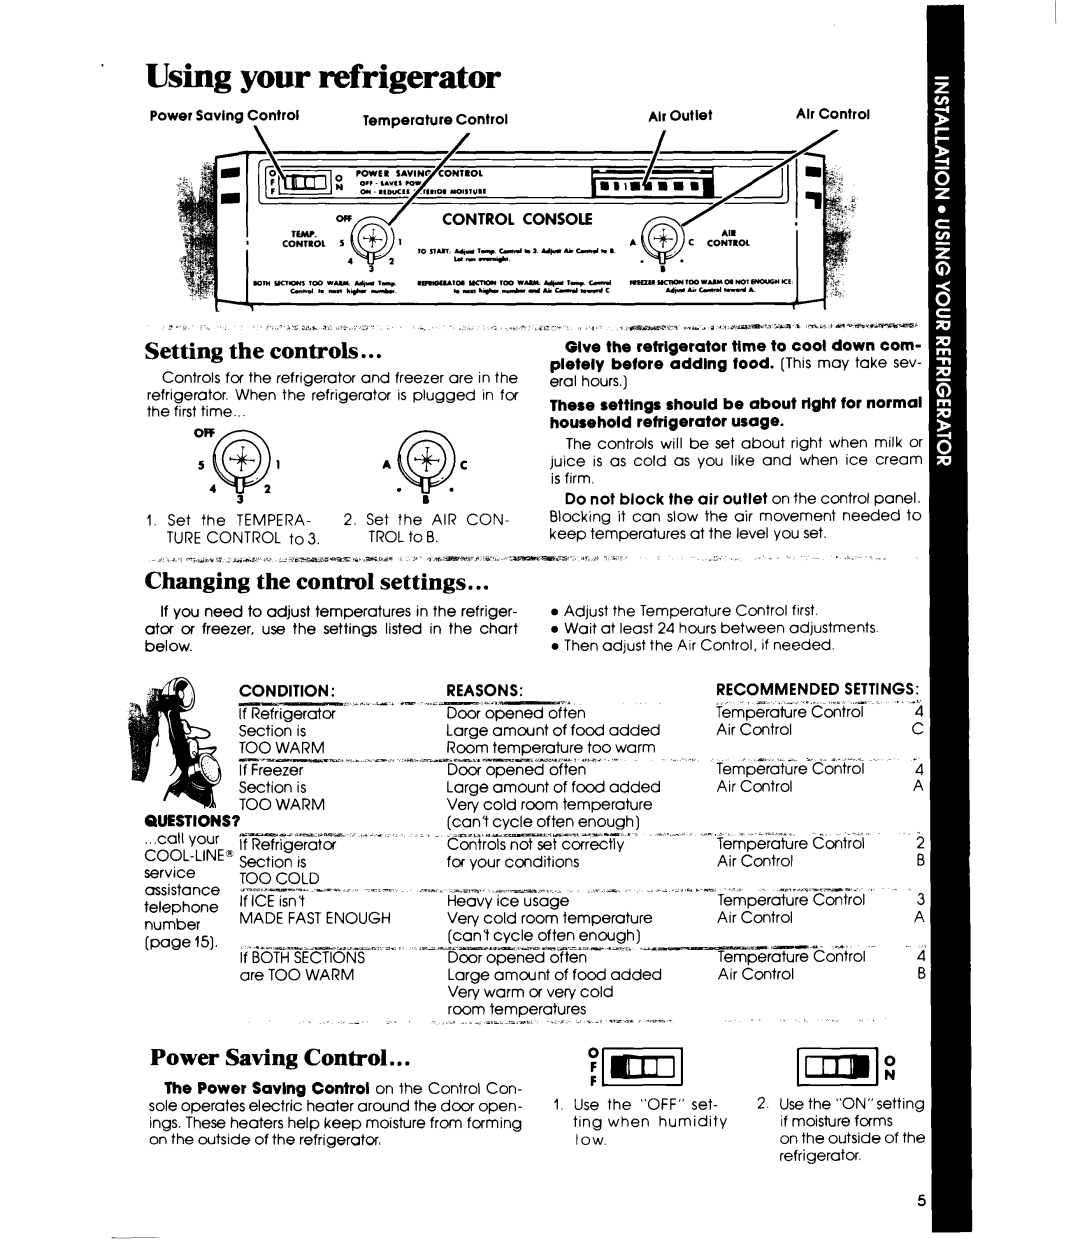 Whirlpool ETl7HK manual ’Using your refrigerator, Setting the controls, Changing the control settings, Power Saving Control 